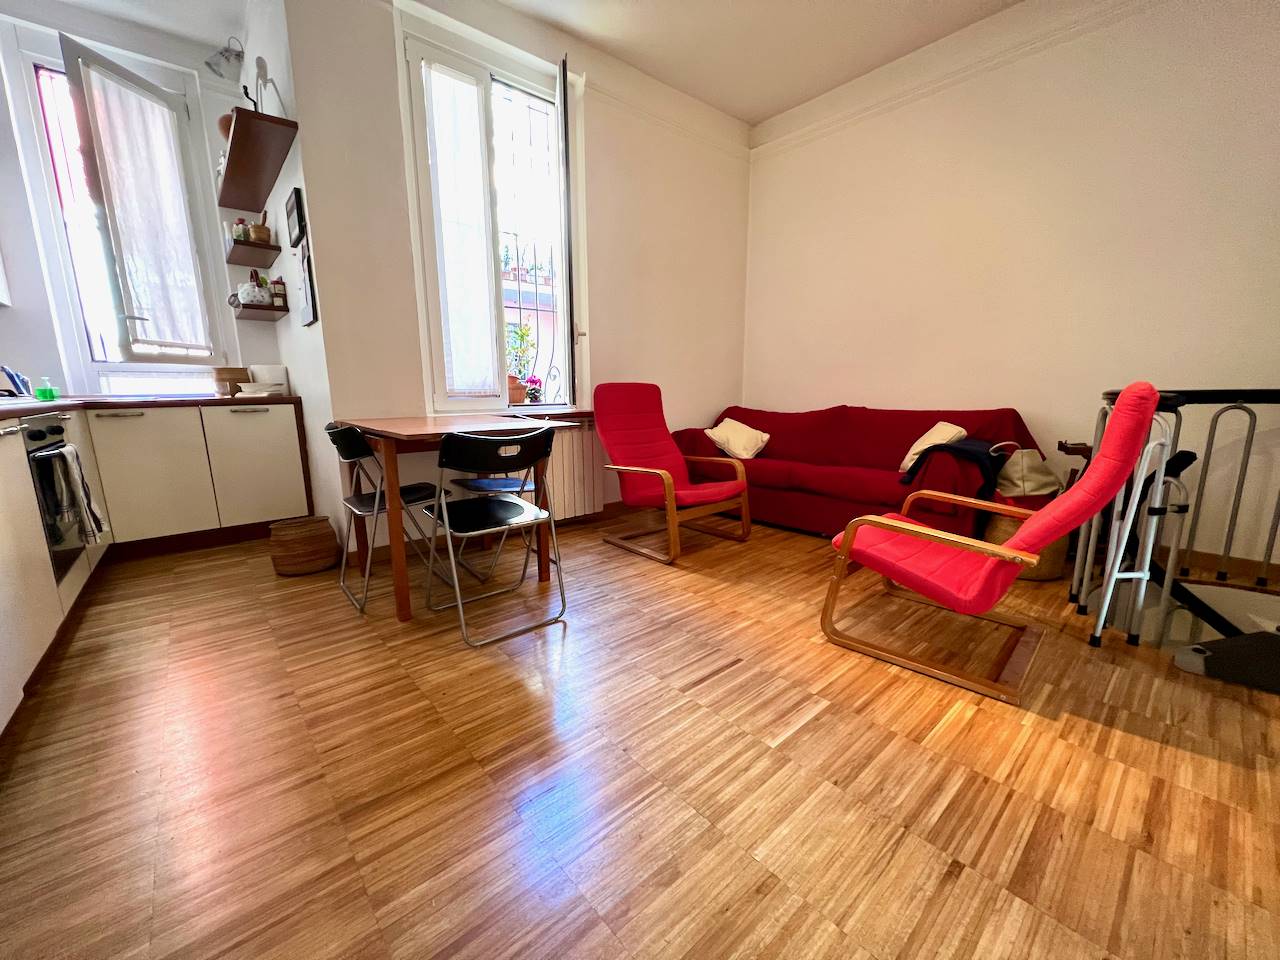 FIRENZE, MILANO, Apartment for sale of 60 Sq. mt., Restored, Heating Individual heating system, Energetic class: G, Epi: 175 kwh/m2 year, placed at 